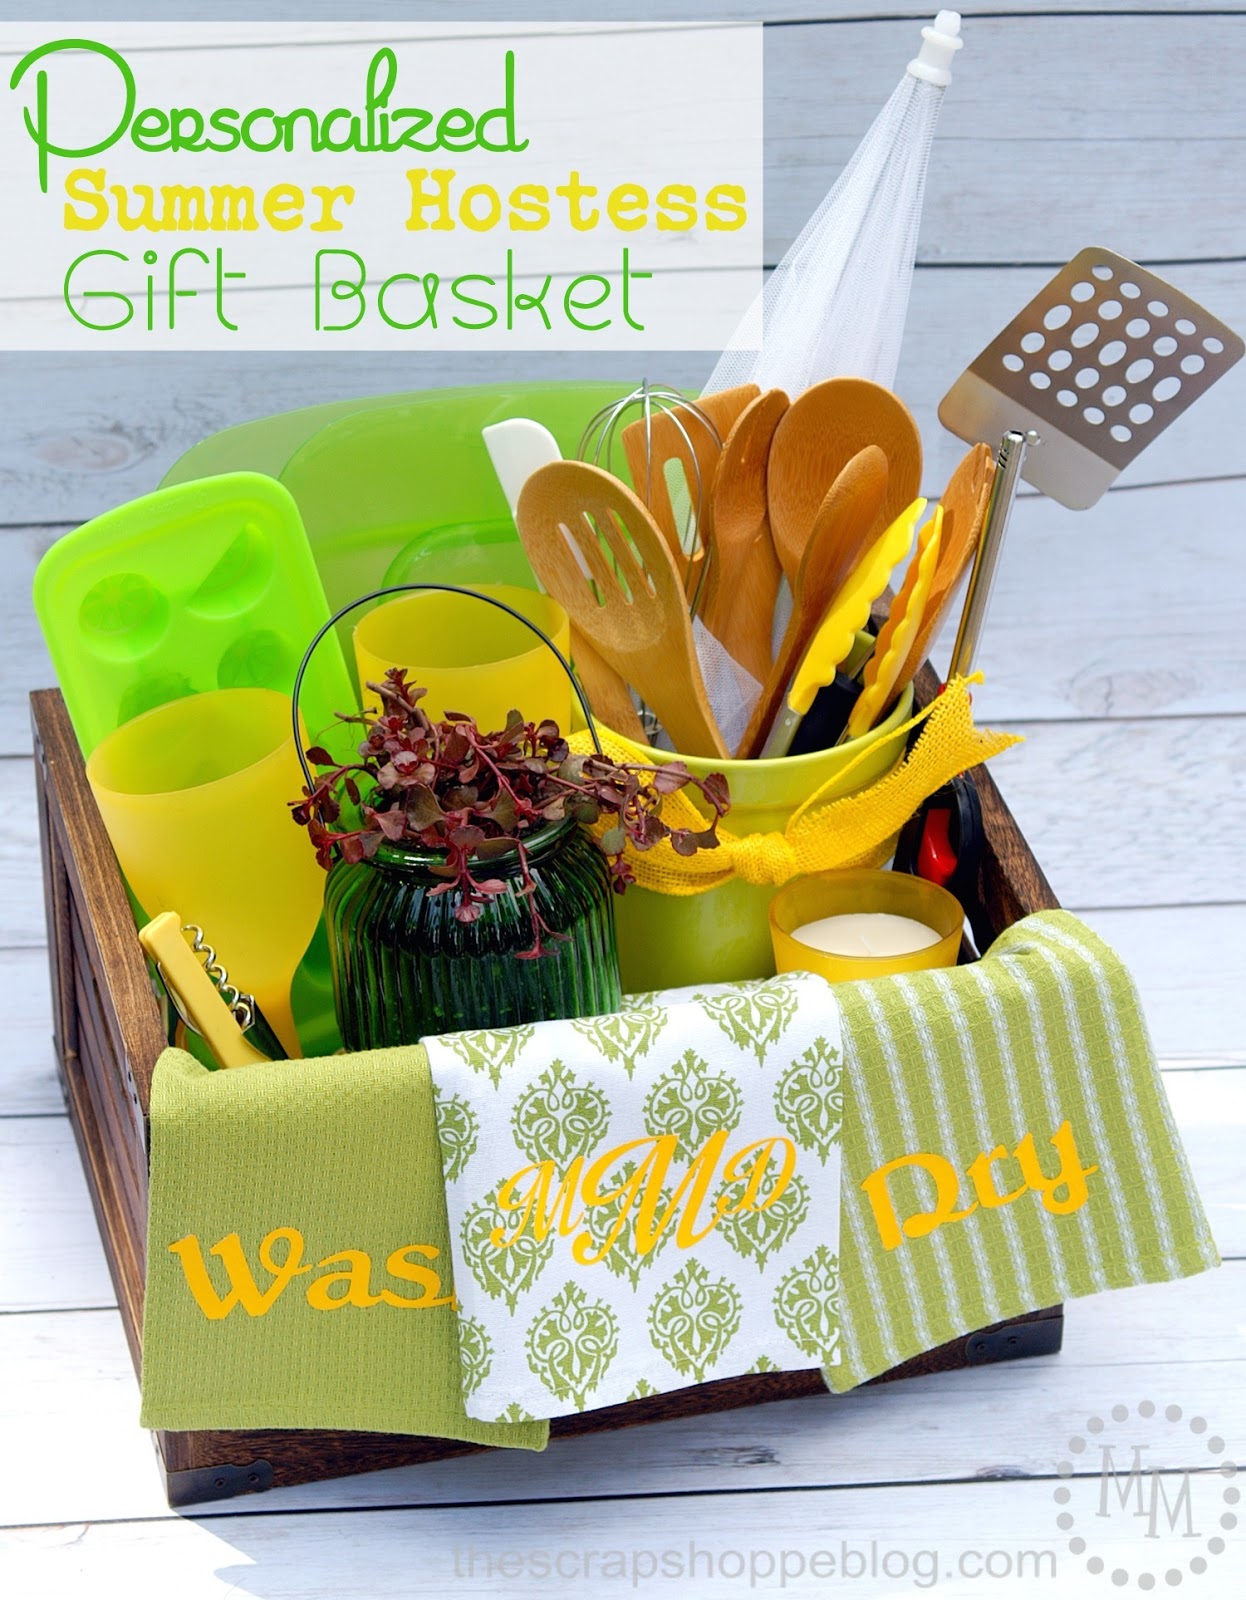 Personalized Summer Hostess Gift Basket - The Scrap Shoppe